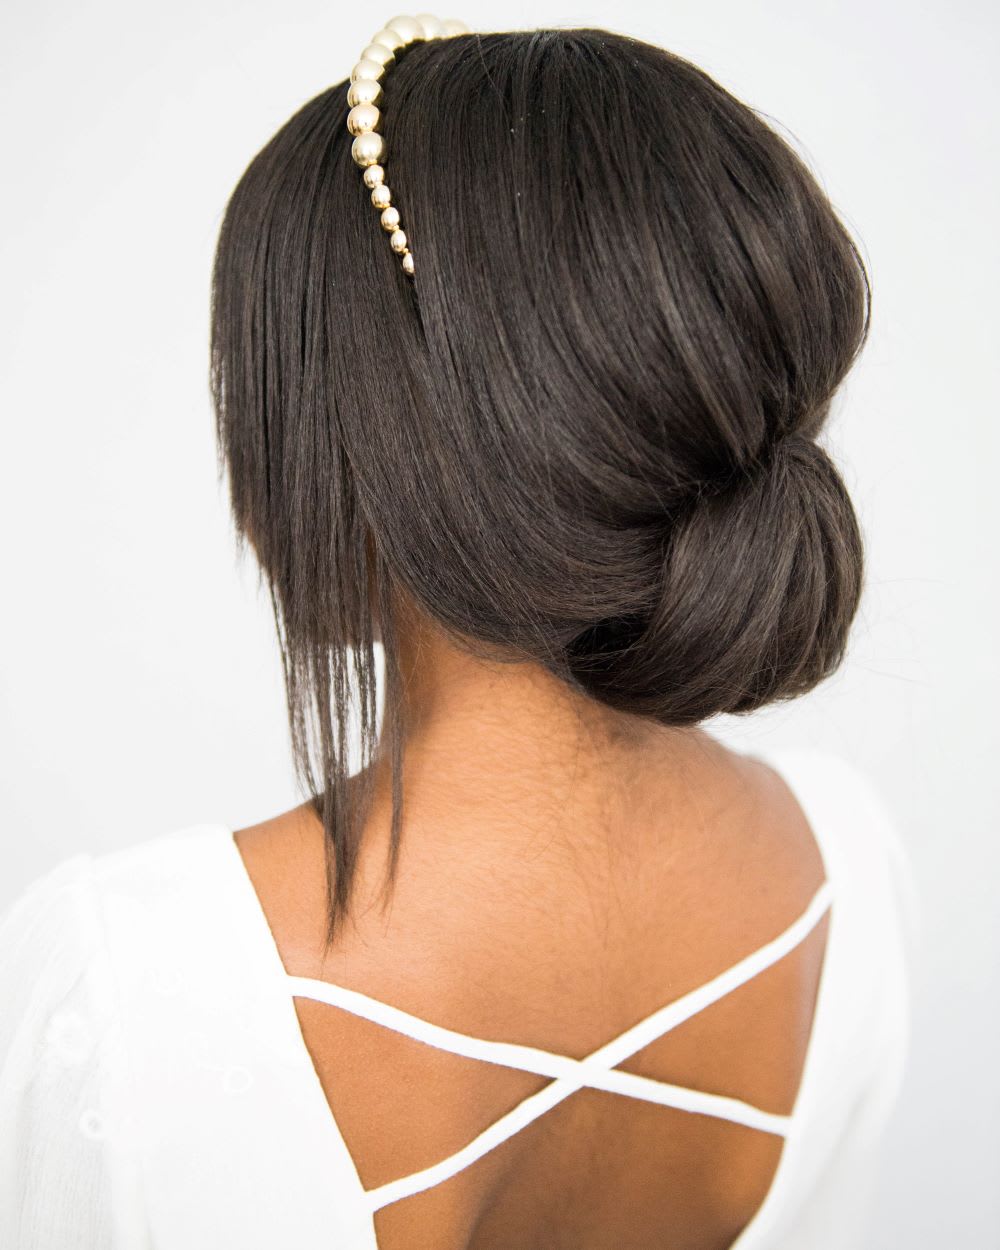 Headband Hairstyles for Brides: An Easy Low Updo Perfect for Wedding Hair -  Lulus.com Fashion Blog